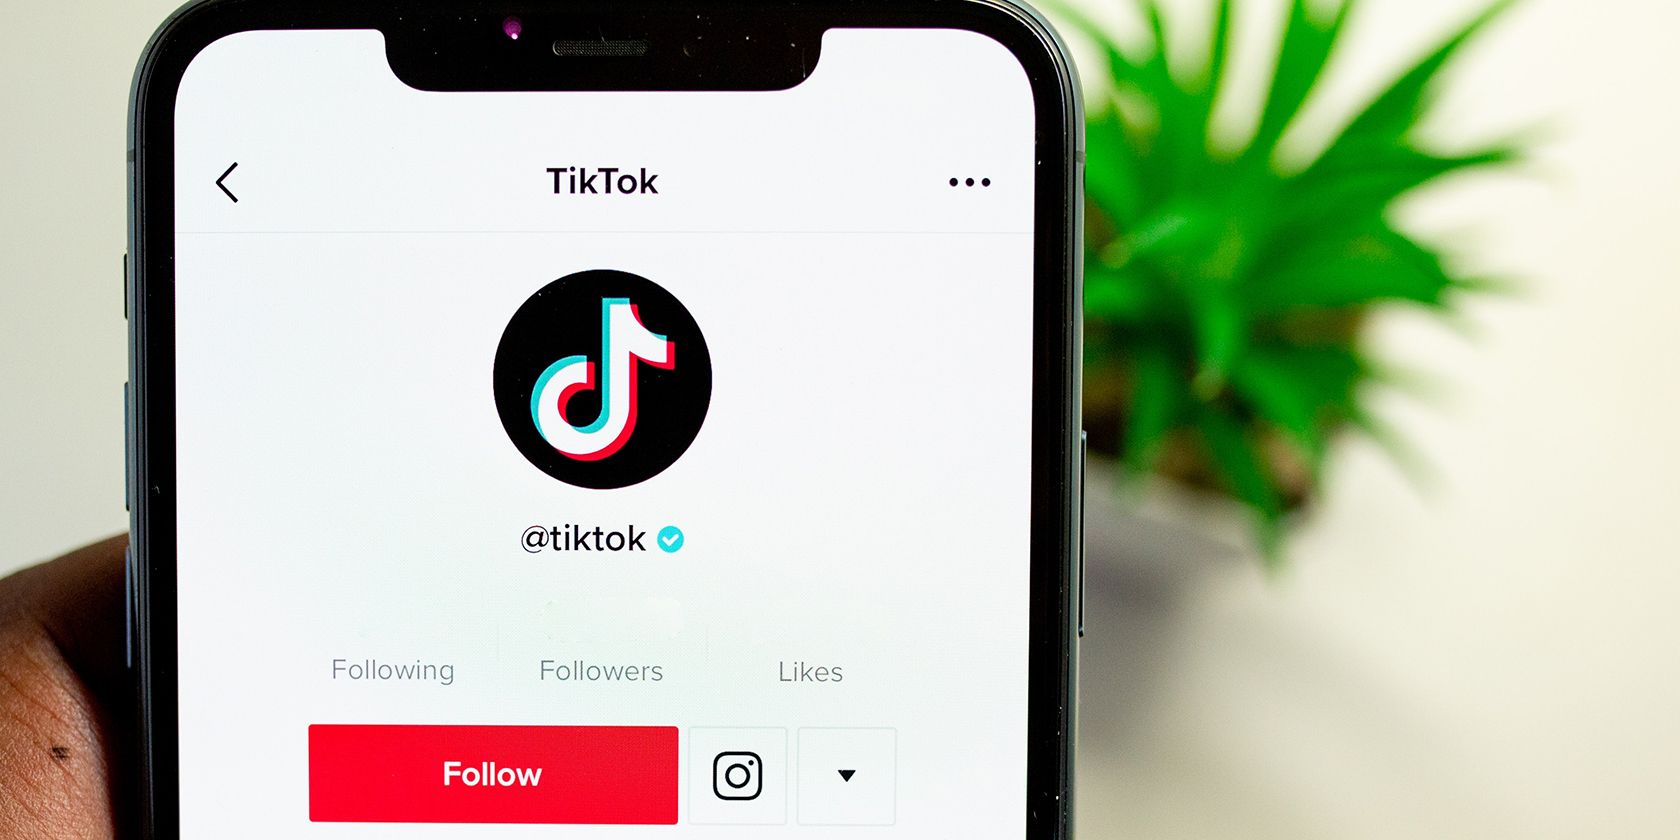 What Does FYP Mean on TikTok?